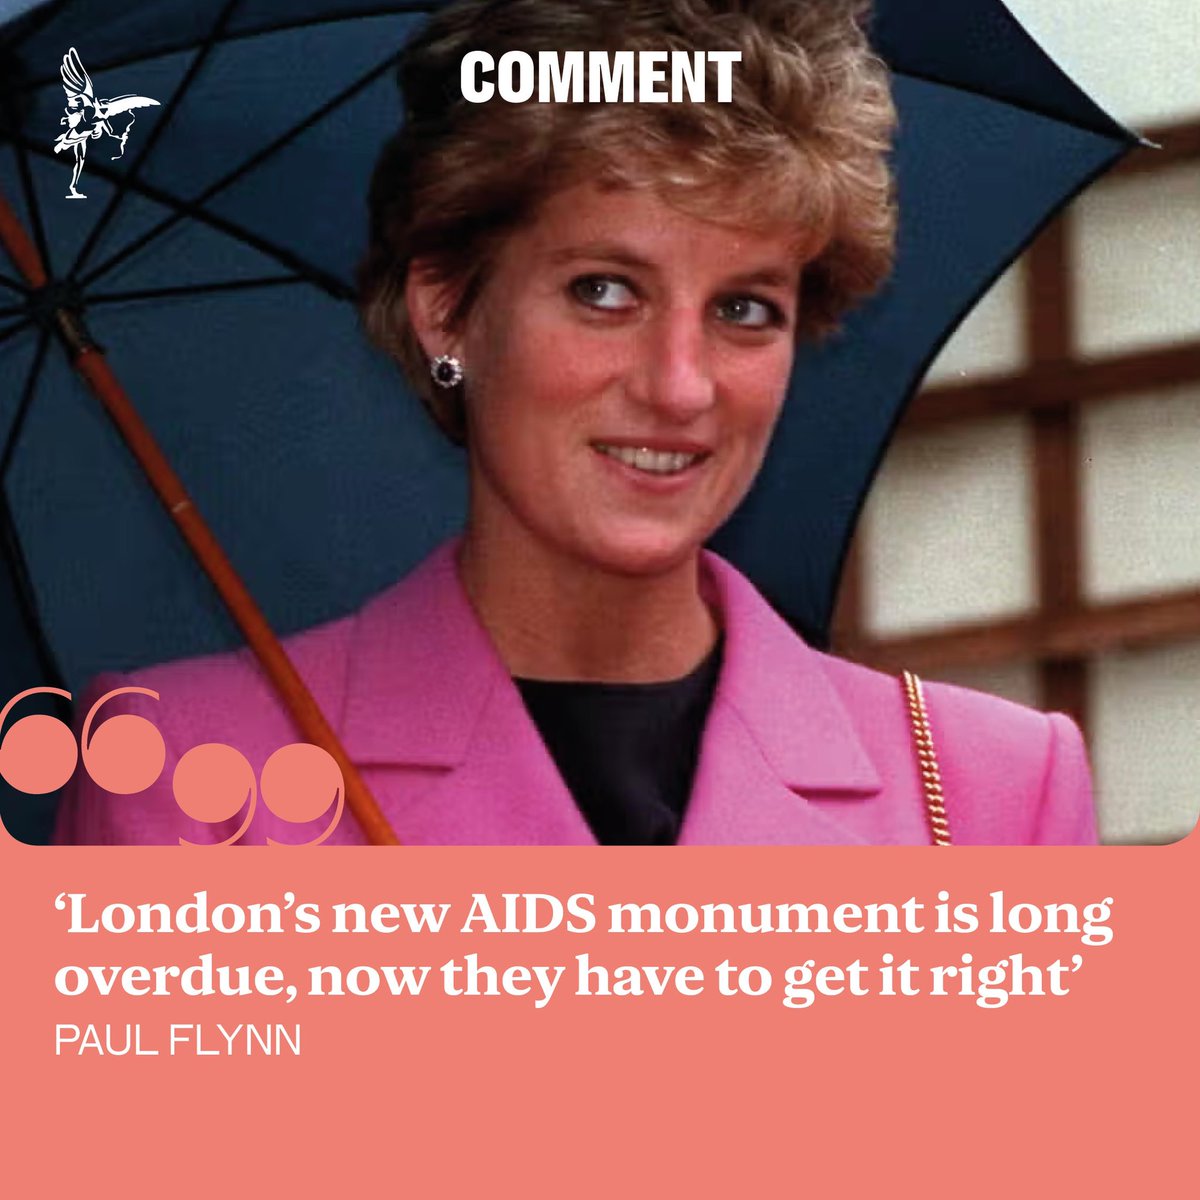 ✍️ Paul Flynn: HIV/AIDS changed the fabric of London, for better and for worse. The monument is a first permanent stake in the city we helped define as a leader on the world equality map Read more: standard.co.uk/comment/aids-h…